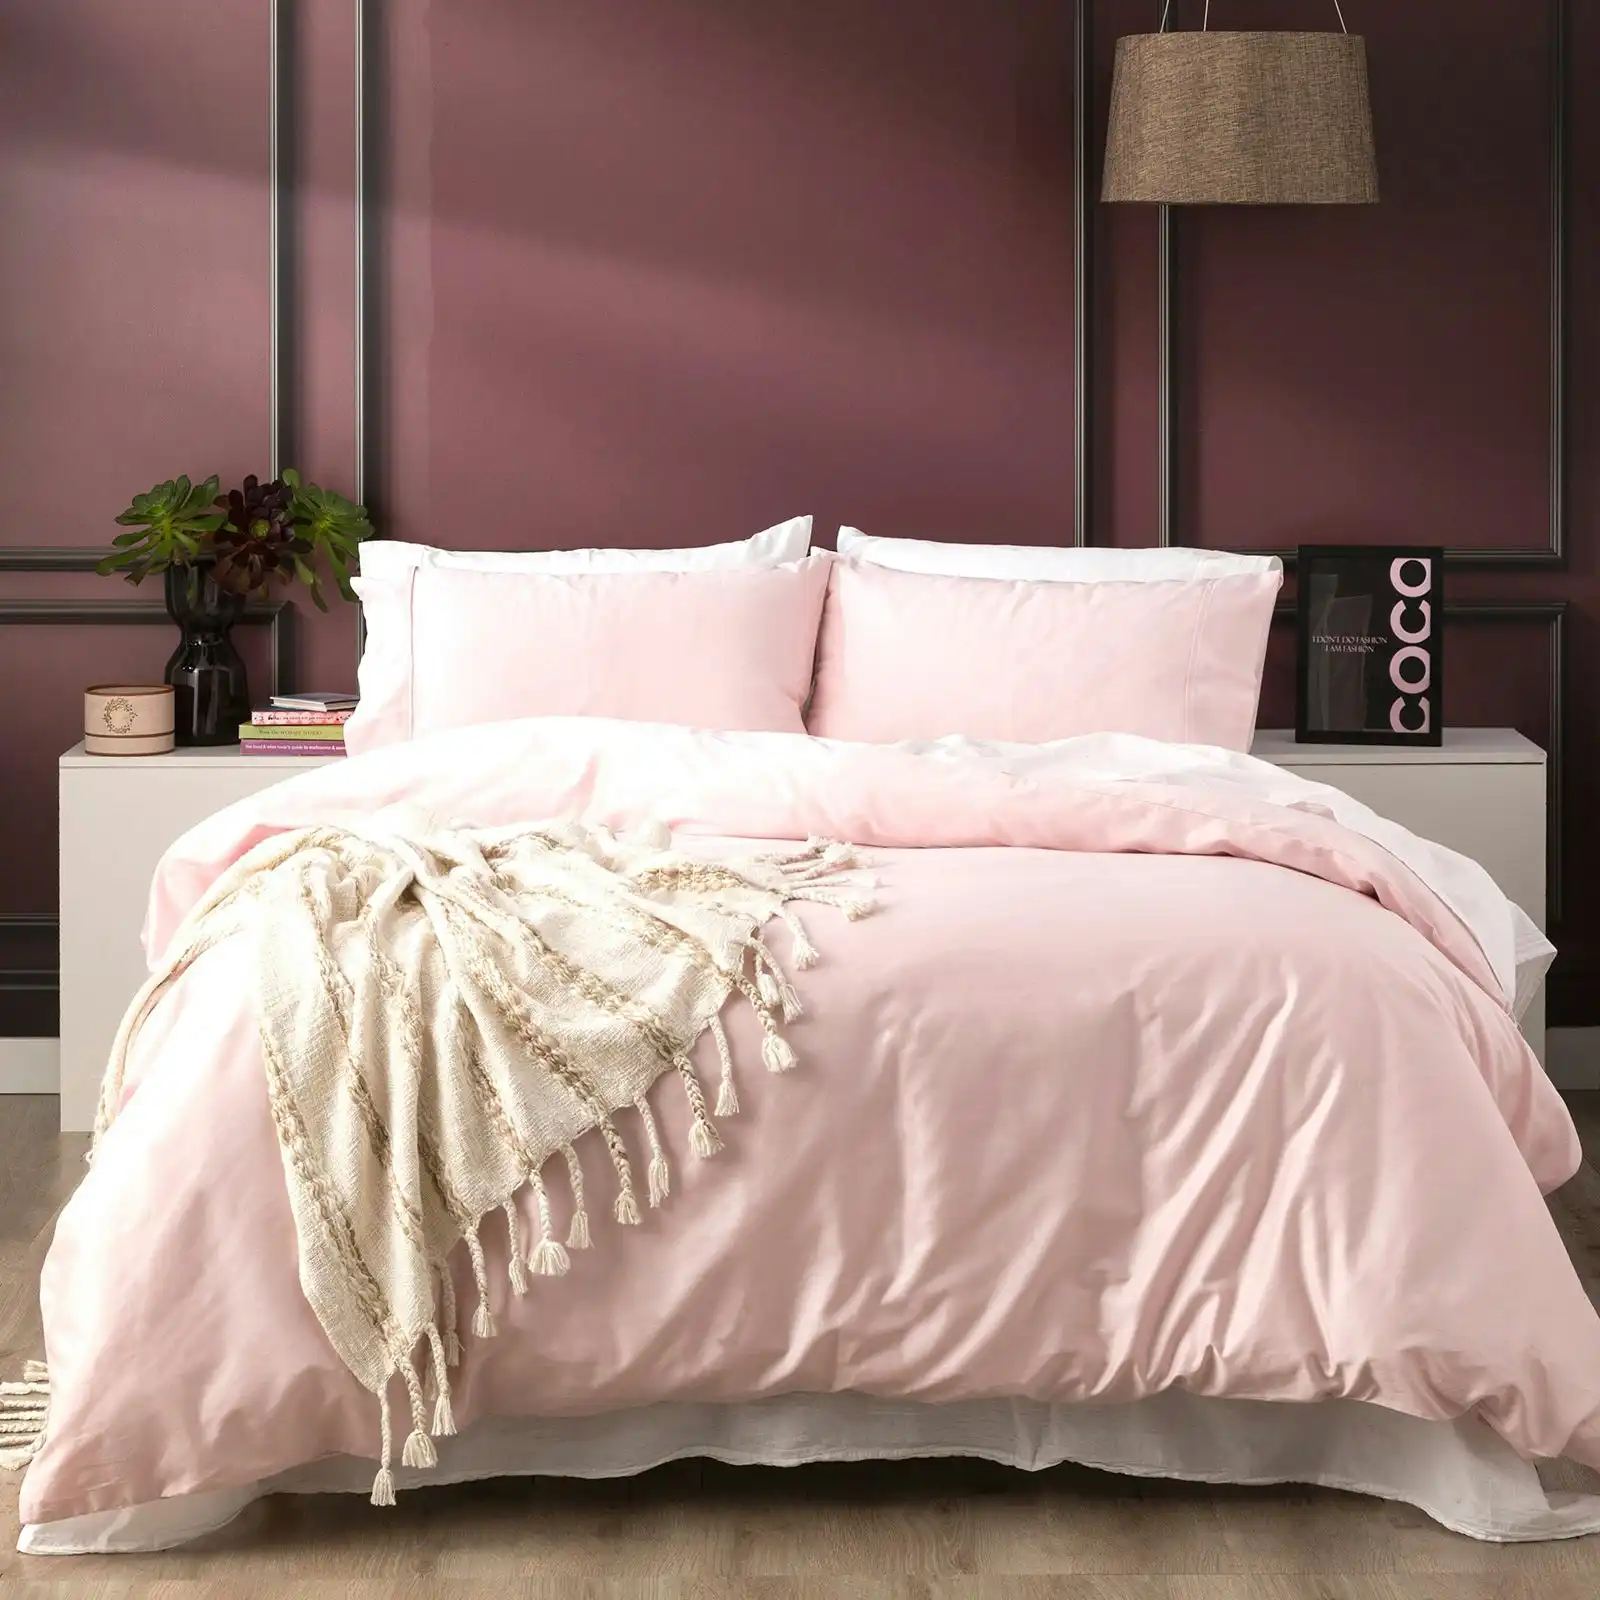 Bamboo Quilt Cover set 500 Thread count Peach